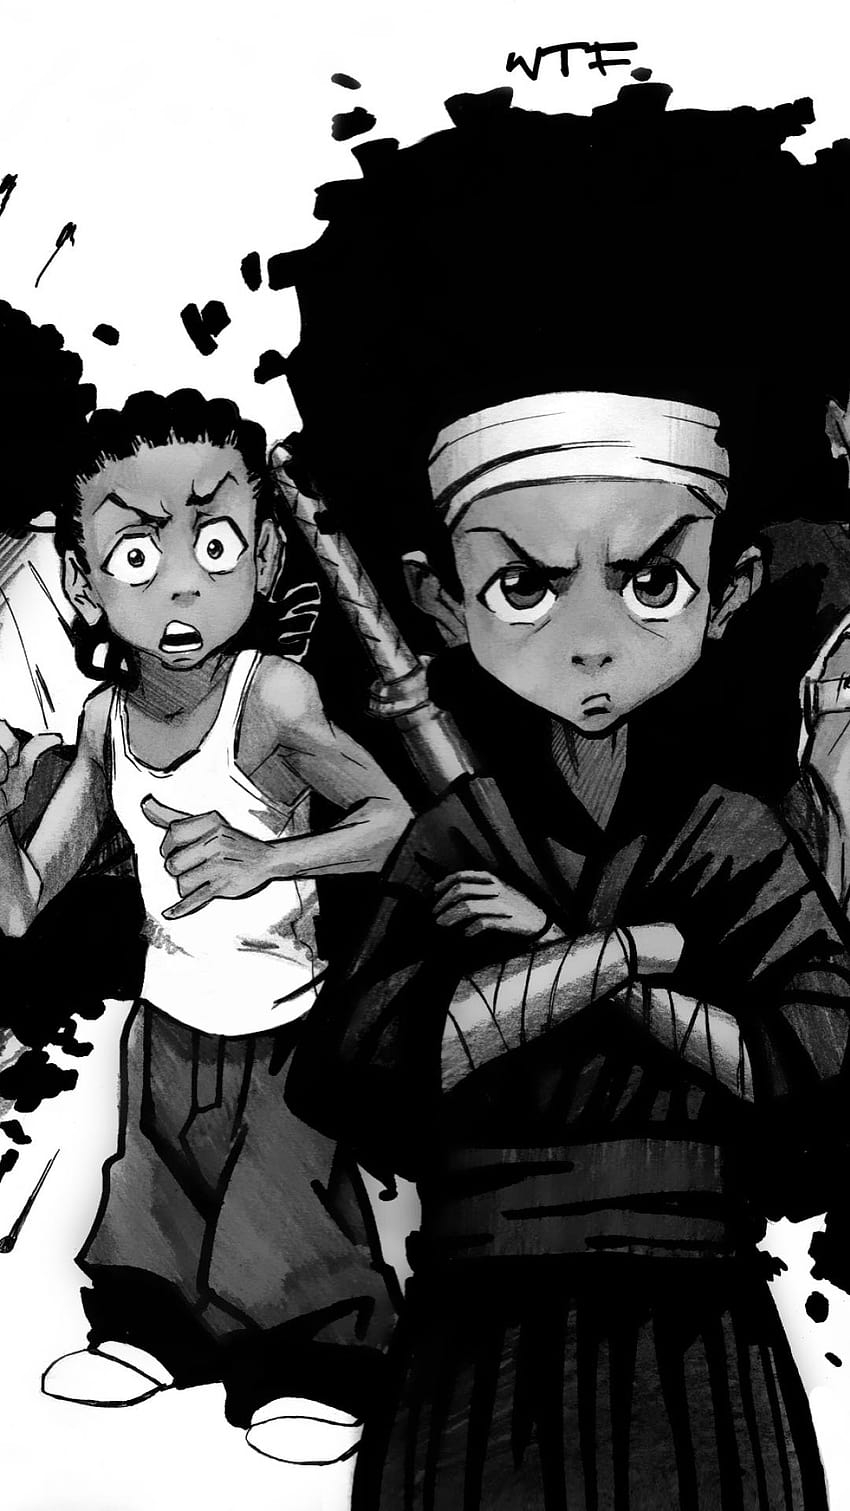 Free download Boondocks Wallpaper 87 images in Collection Page 2 720x715  for your Desktop Mobile  Tablet  Explore 18 Supreme BoonDocks Wallpapers   The Boondocks Wallpaper The Boondocks Wallpapers Boondocks Wallpapers